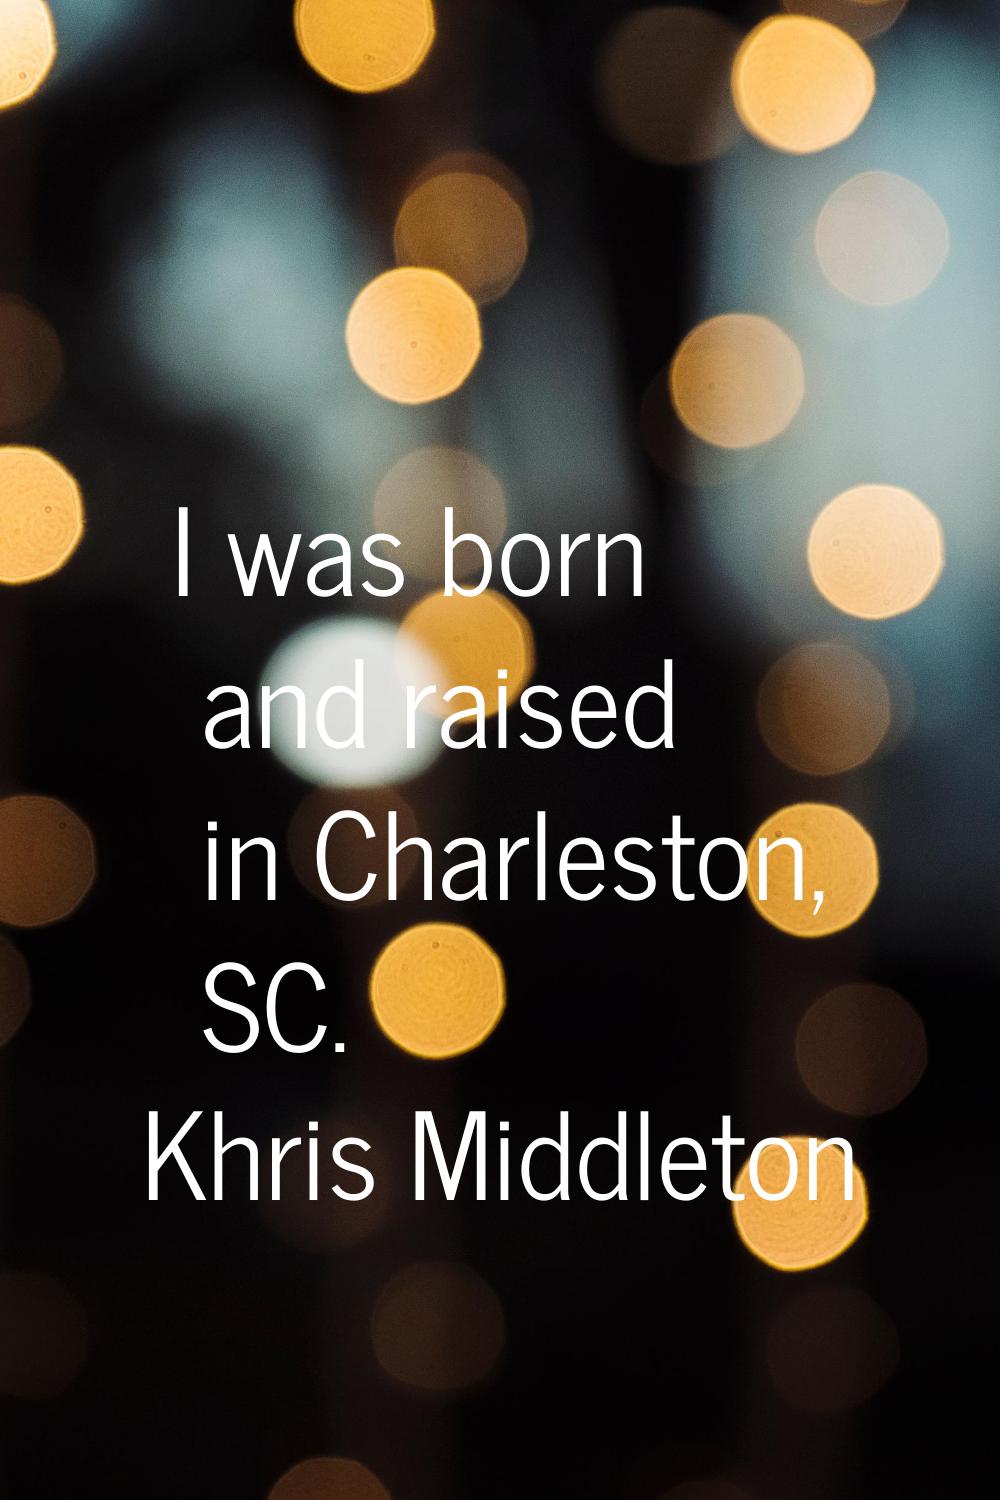 I was born and raised in Charleston, SC.